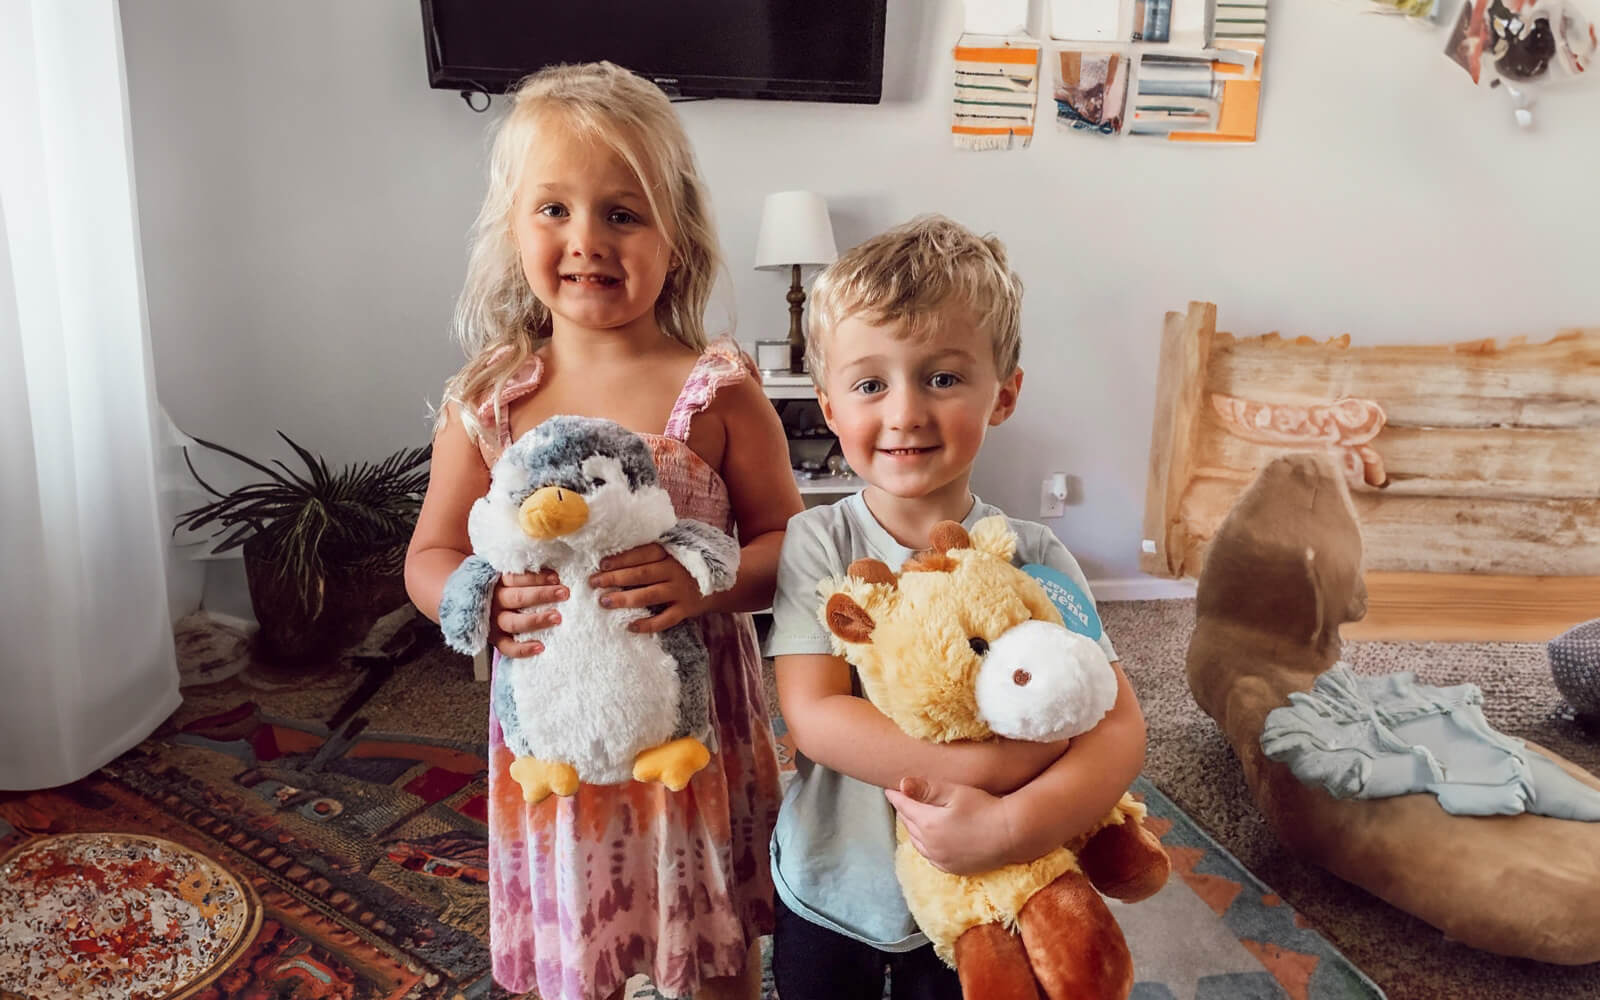 An image of two children smiling, one holding Pepper the Penguin and the other holding George the Giraffe